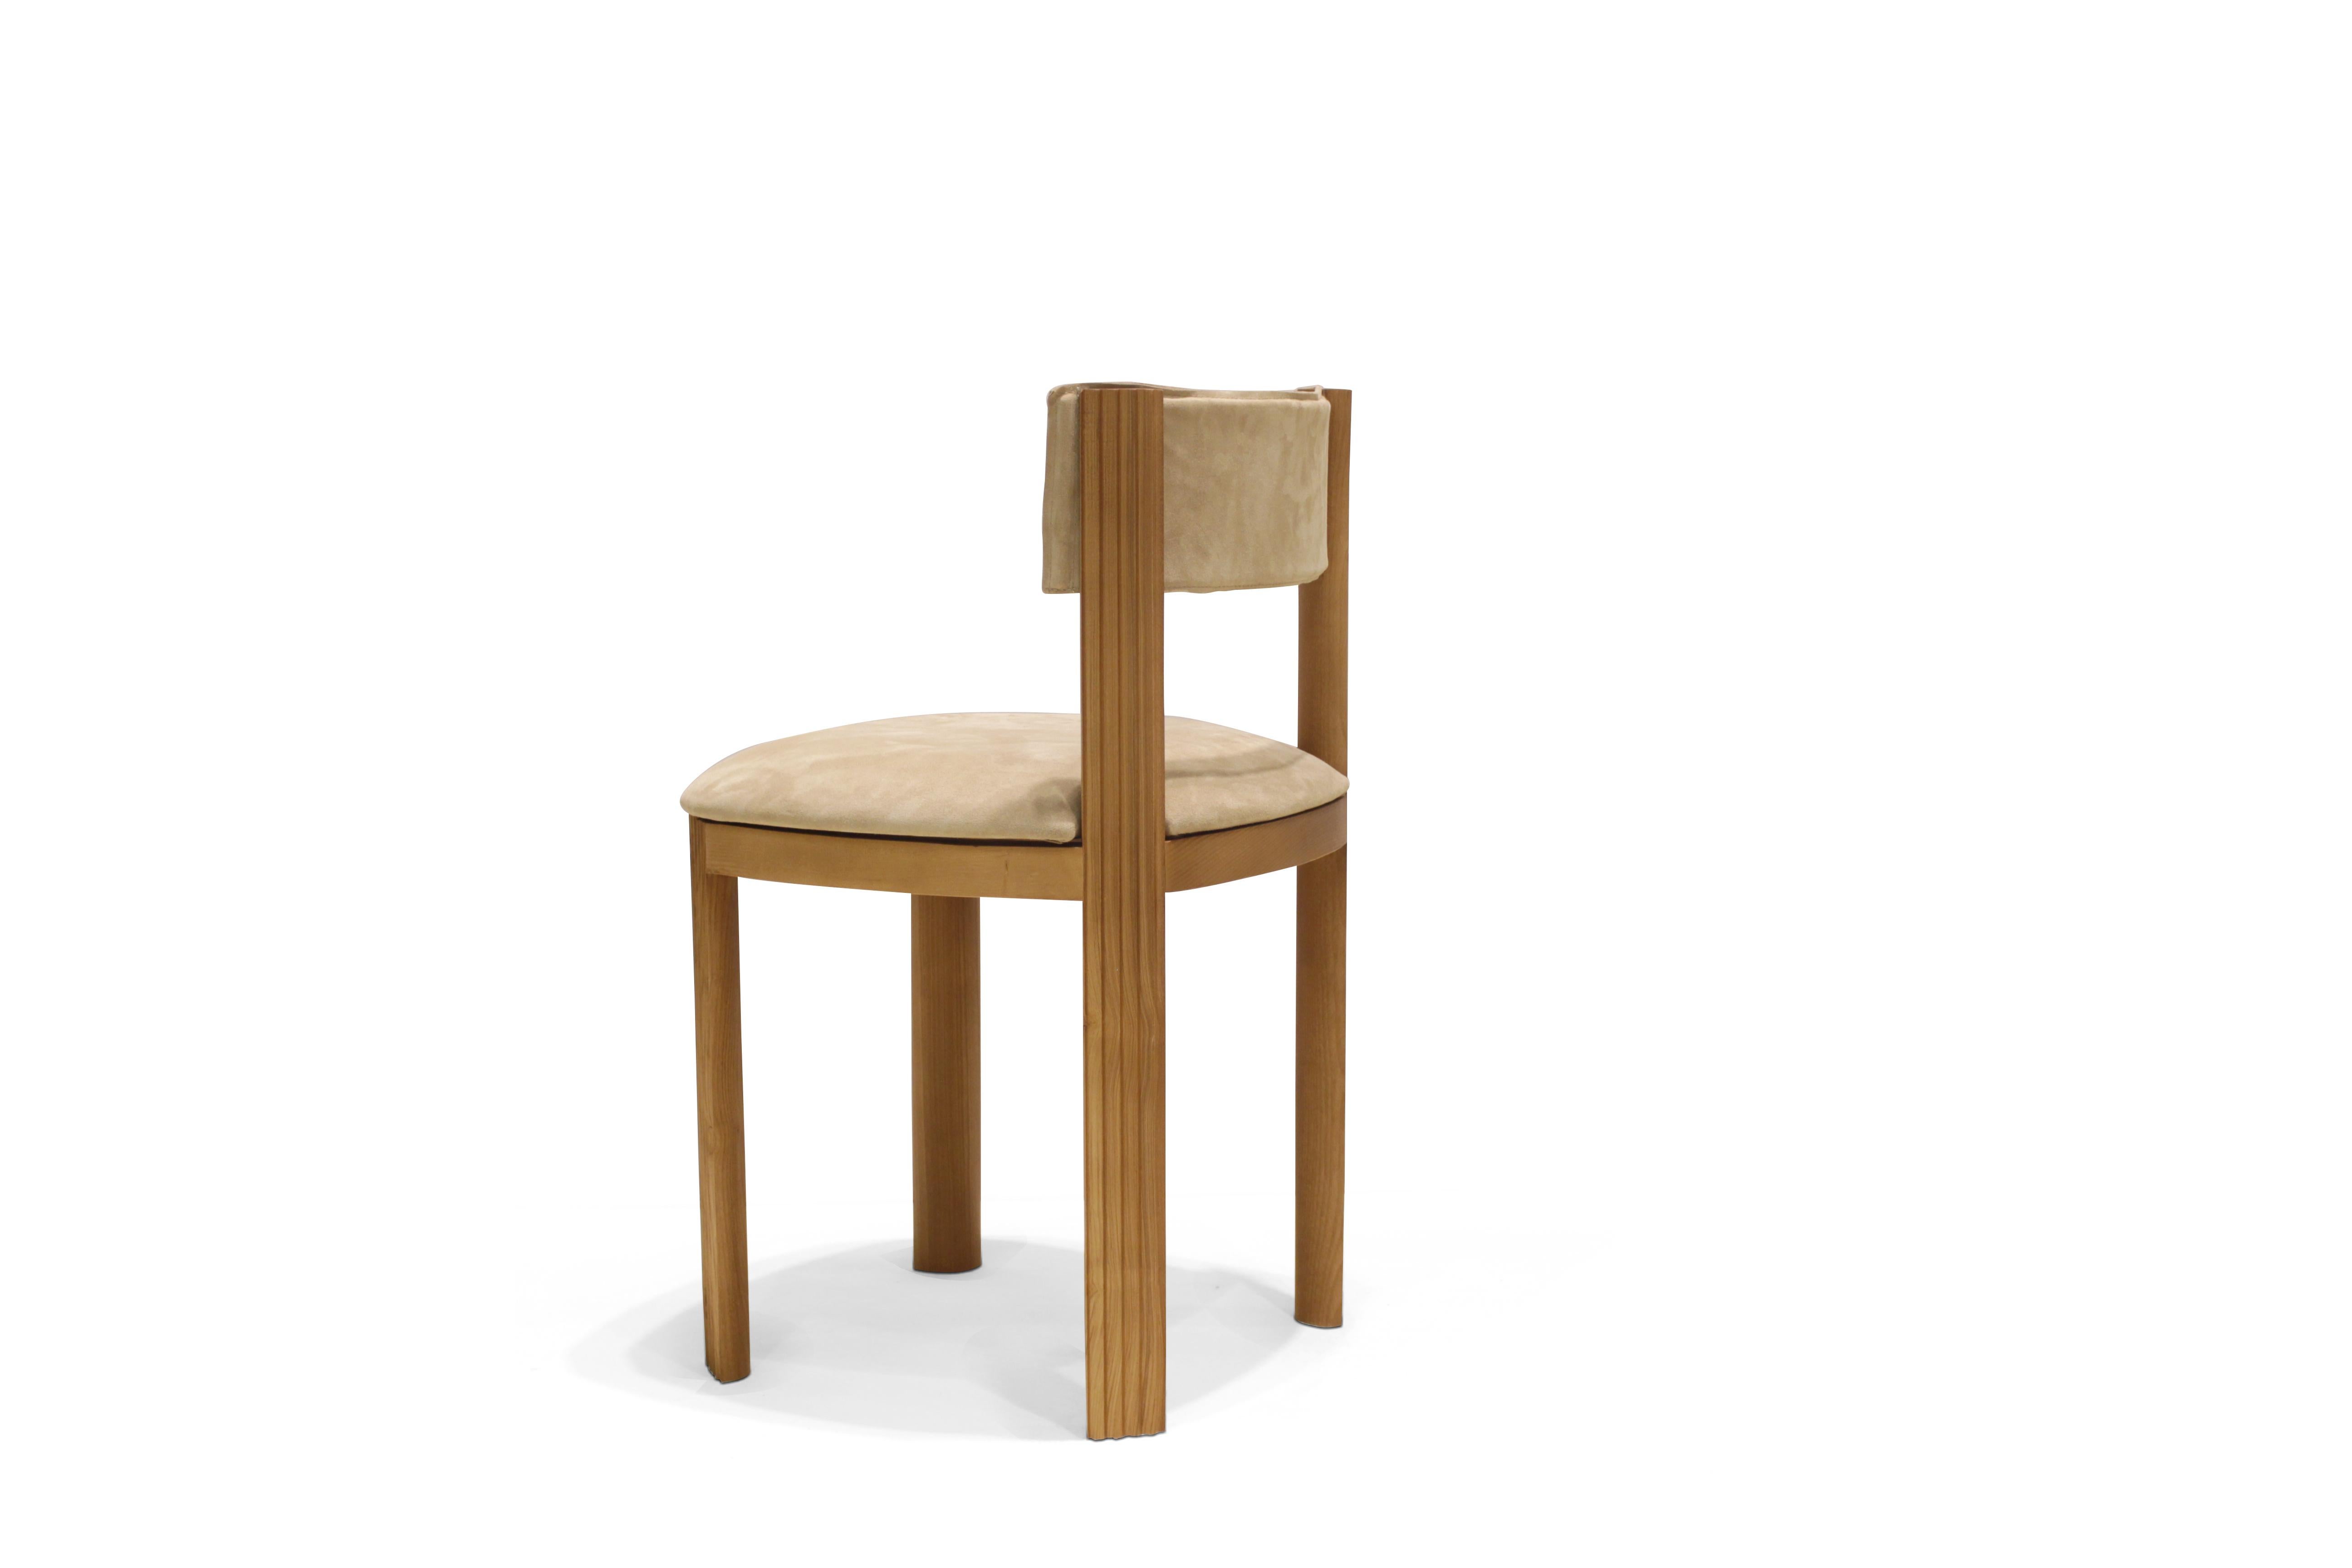 Set of 4 111 dining chair by Collector
Materials: upholstered in genuine velve siege linen.
Solid oak feet
Dimensions: W 45 x D 50 x H 77 cm SH 48 cm

111 represents all the lines incesed in the surface of the solid wood.

The Collector brand